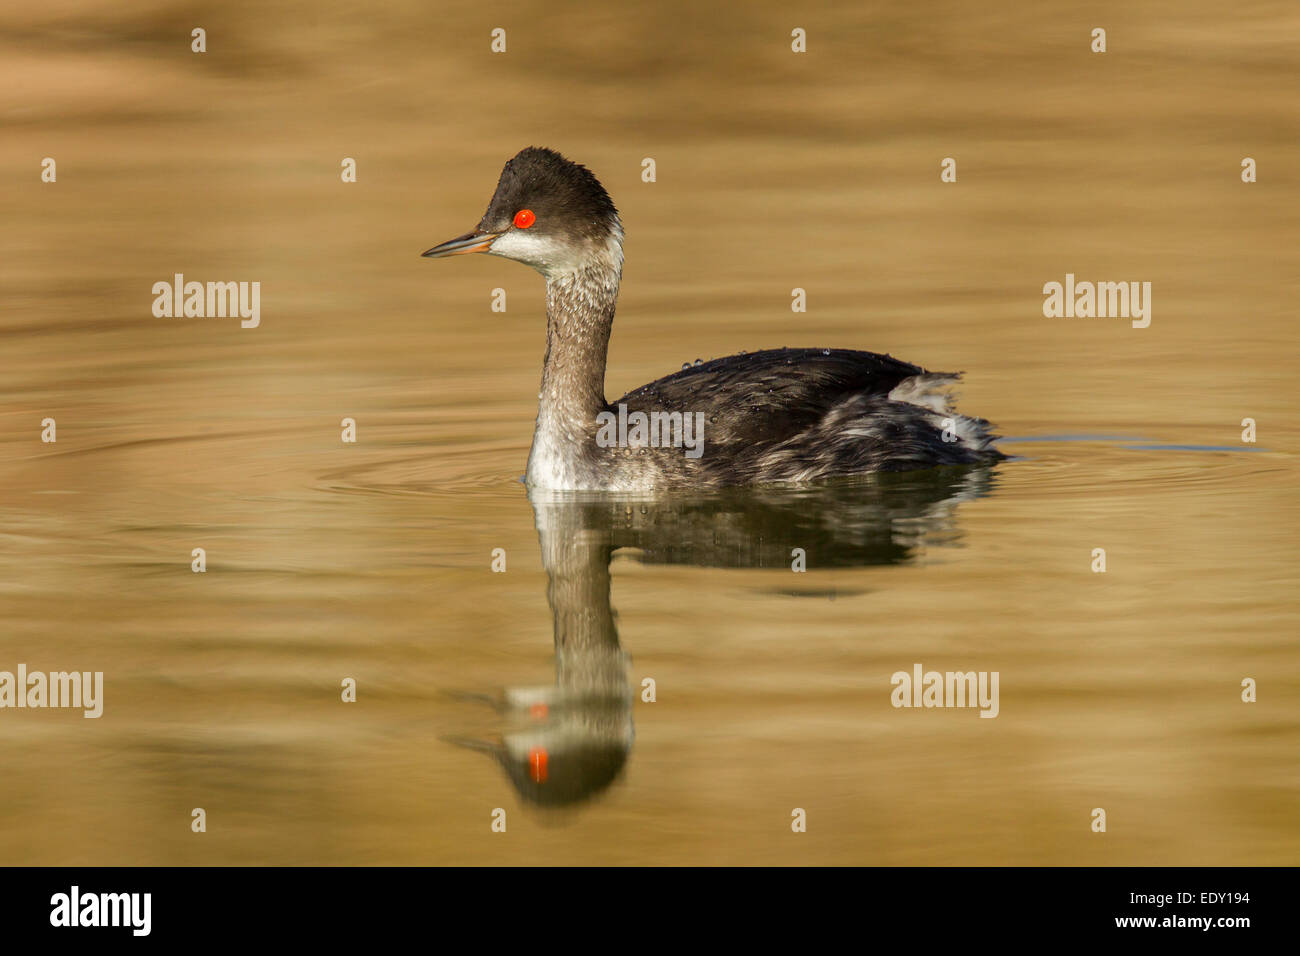 Eared Grebe  Podiceps nigricollis  McNeal, Cochise County, Arizona, United States  9 January         Adult in winter plumage. Stock Photo